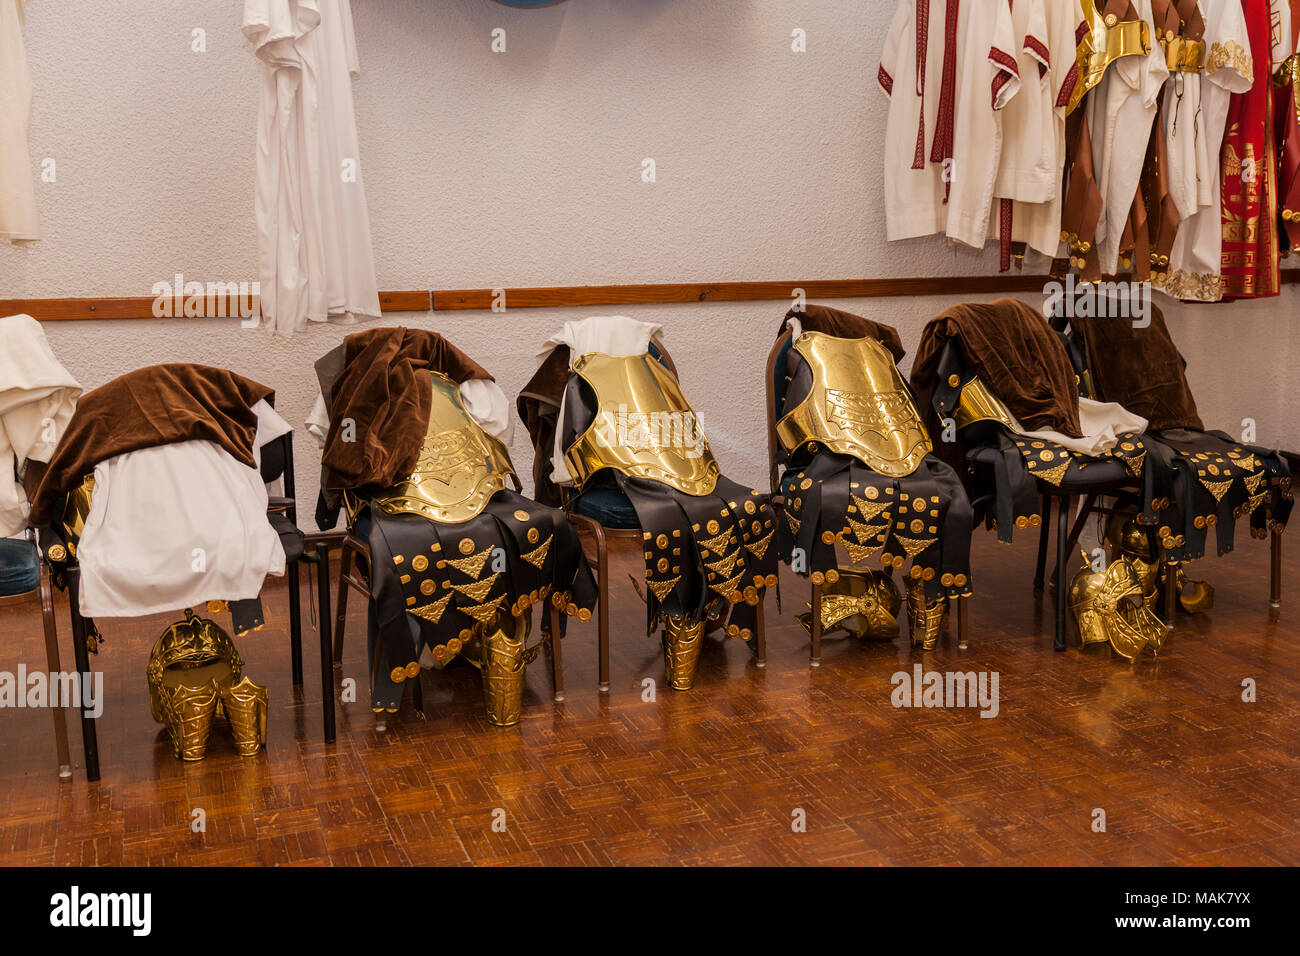 Roman soldier costumes with brass coloured breastplates in the dressing room for the Passion play, Adeje, Tenerife, Canary Islands, Spain Stock Photo